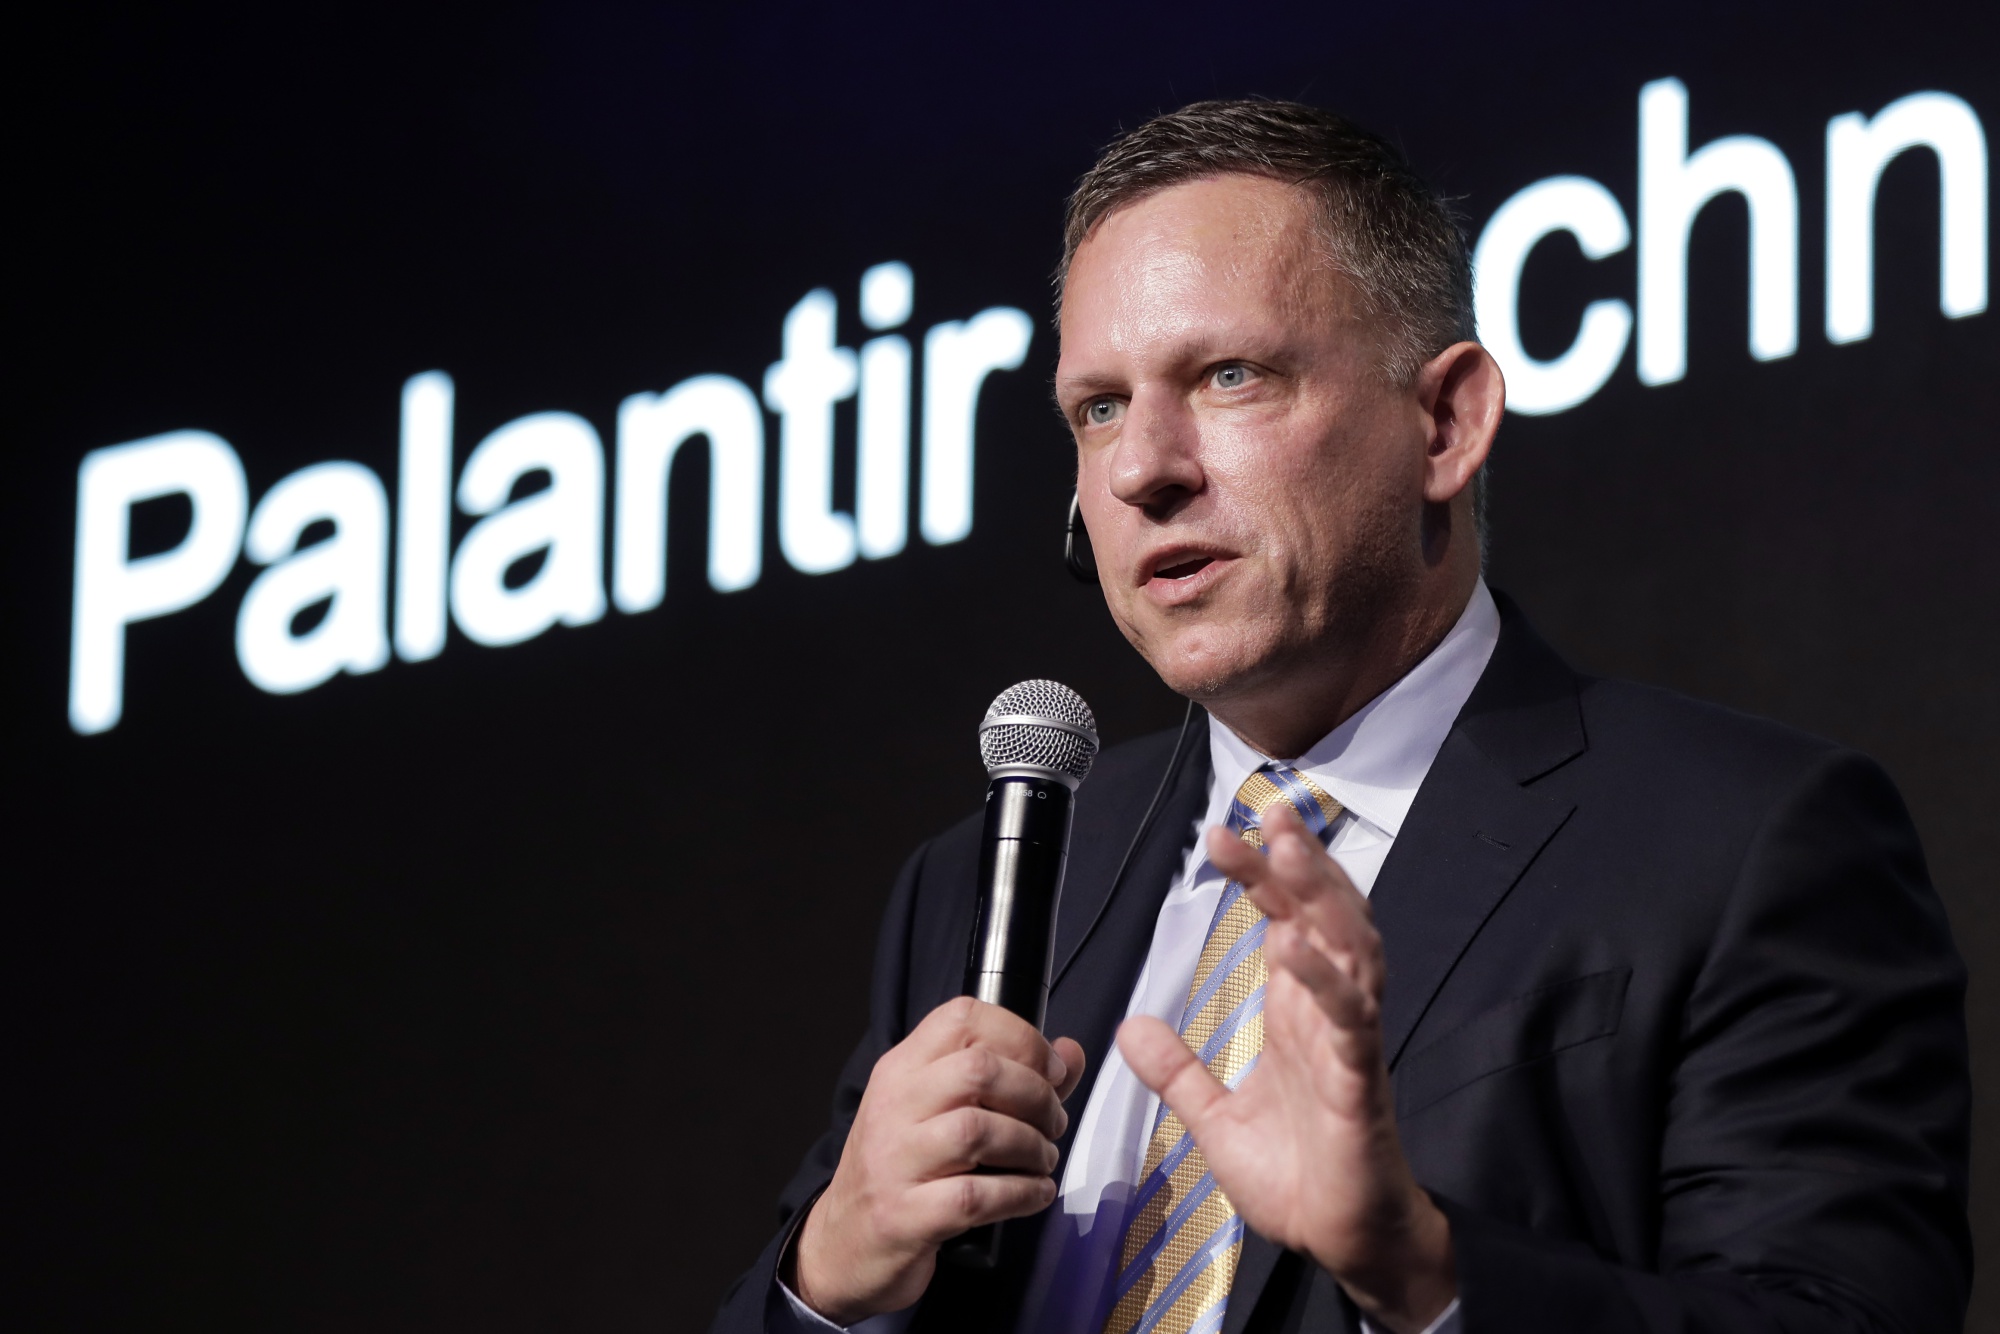 
What Peter Thiel REALLY Thinks About Venture Capital: Shocking Revelations Inside